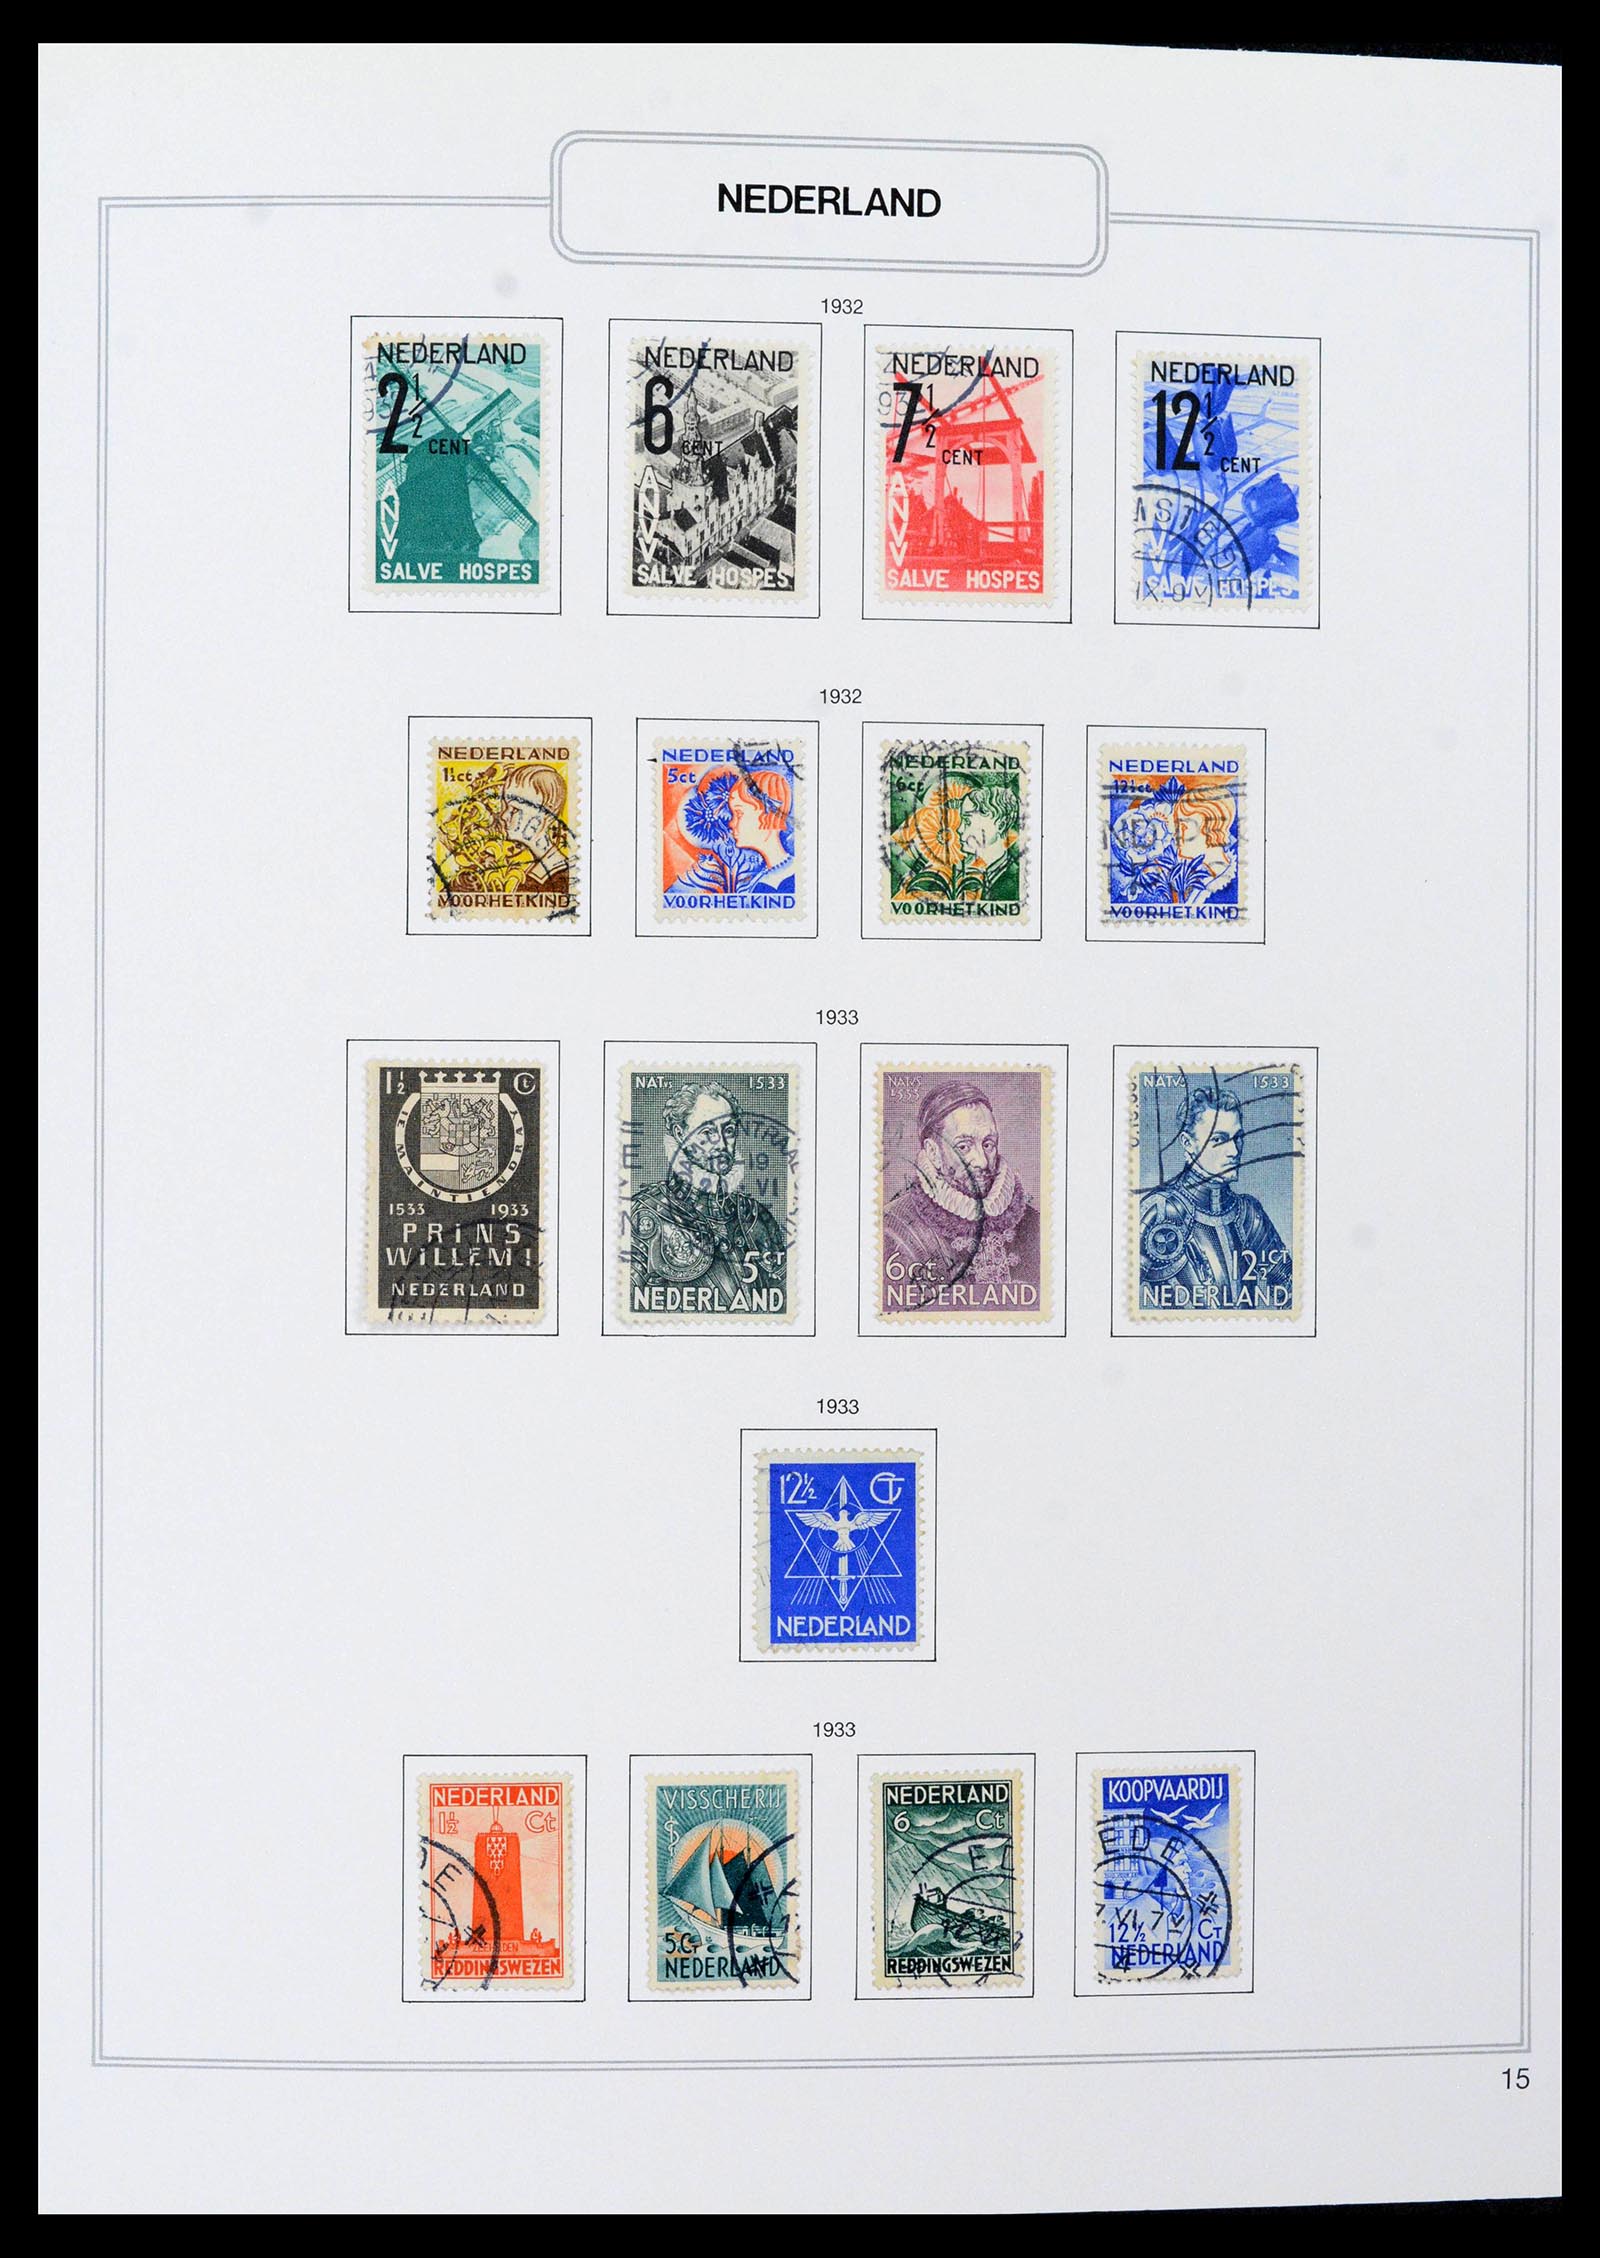 39261 0015 - Stamp collection 39261 Netherlands 1852-2015.